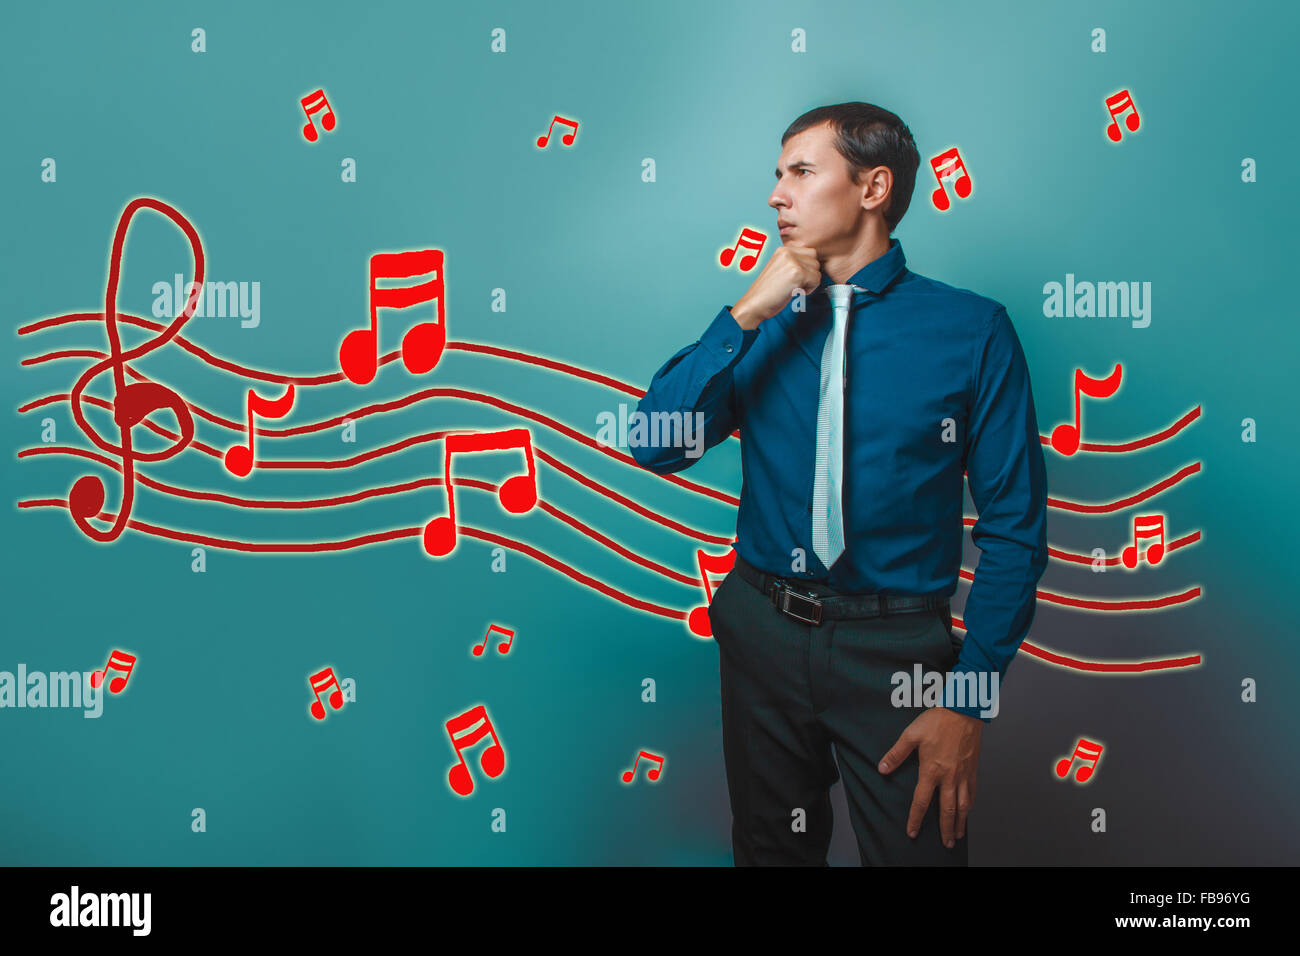 A man holds a hand to his chin music notes sketch prevent sound Stock Photo